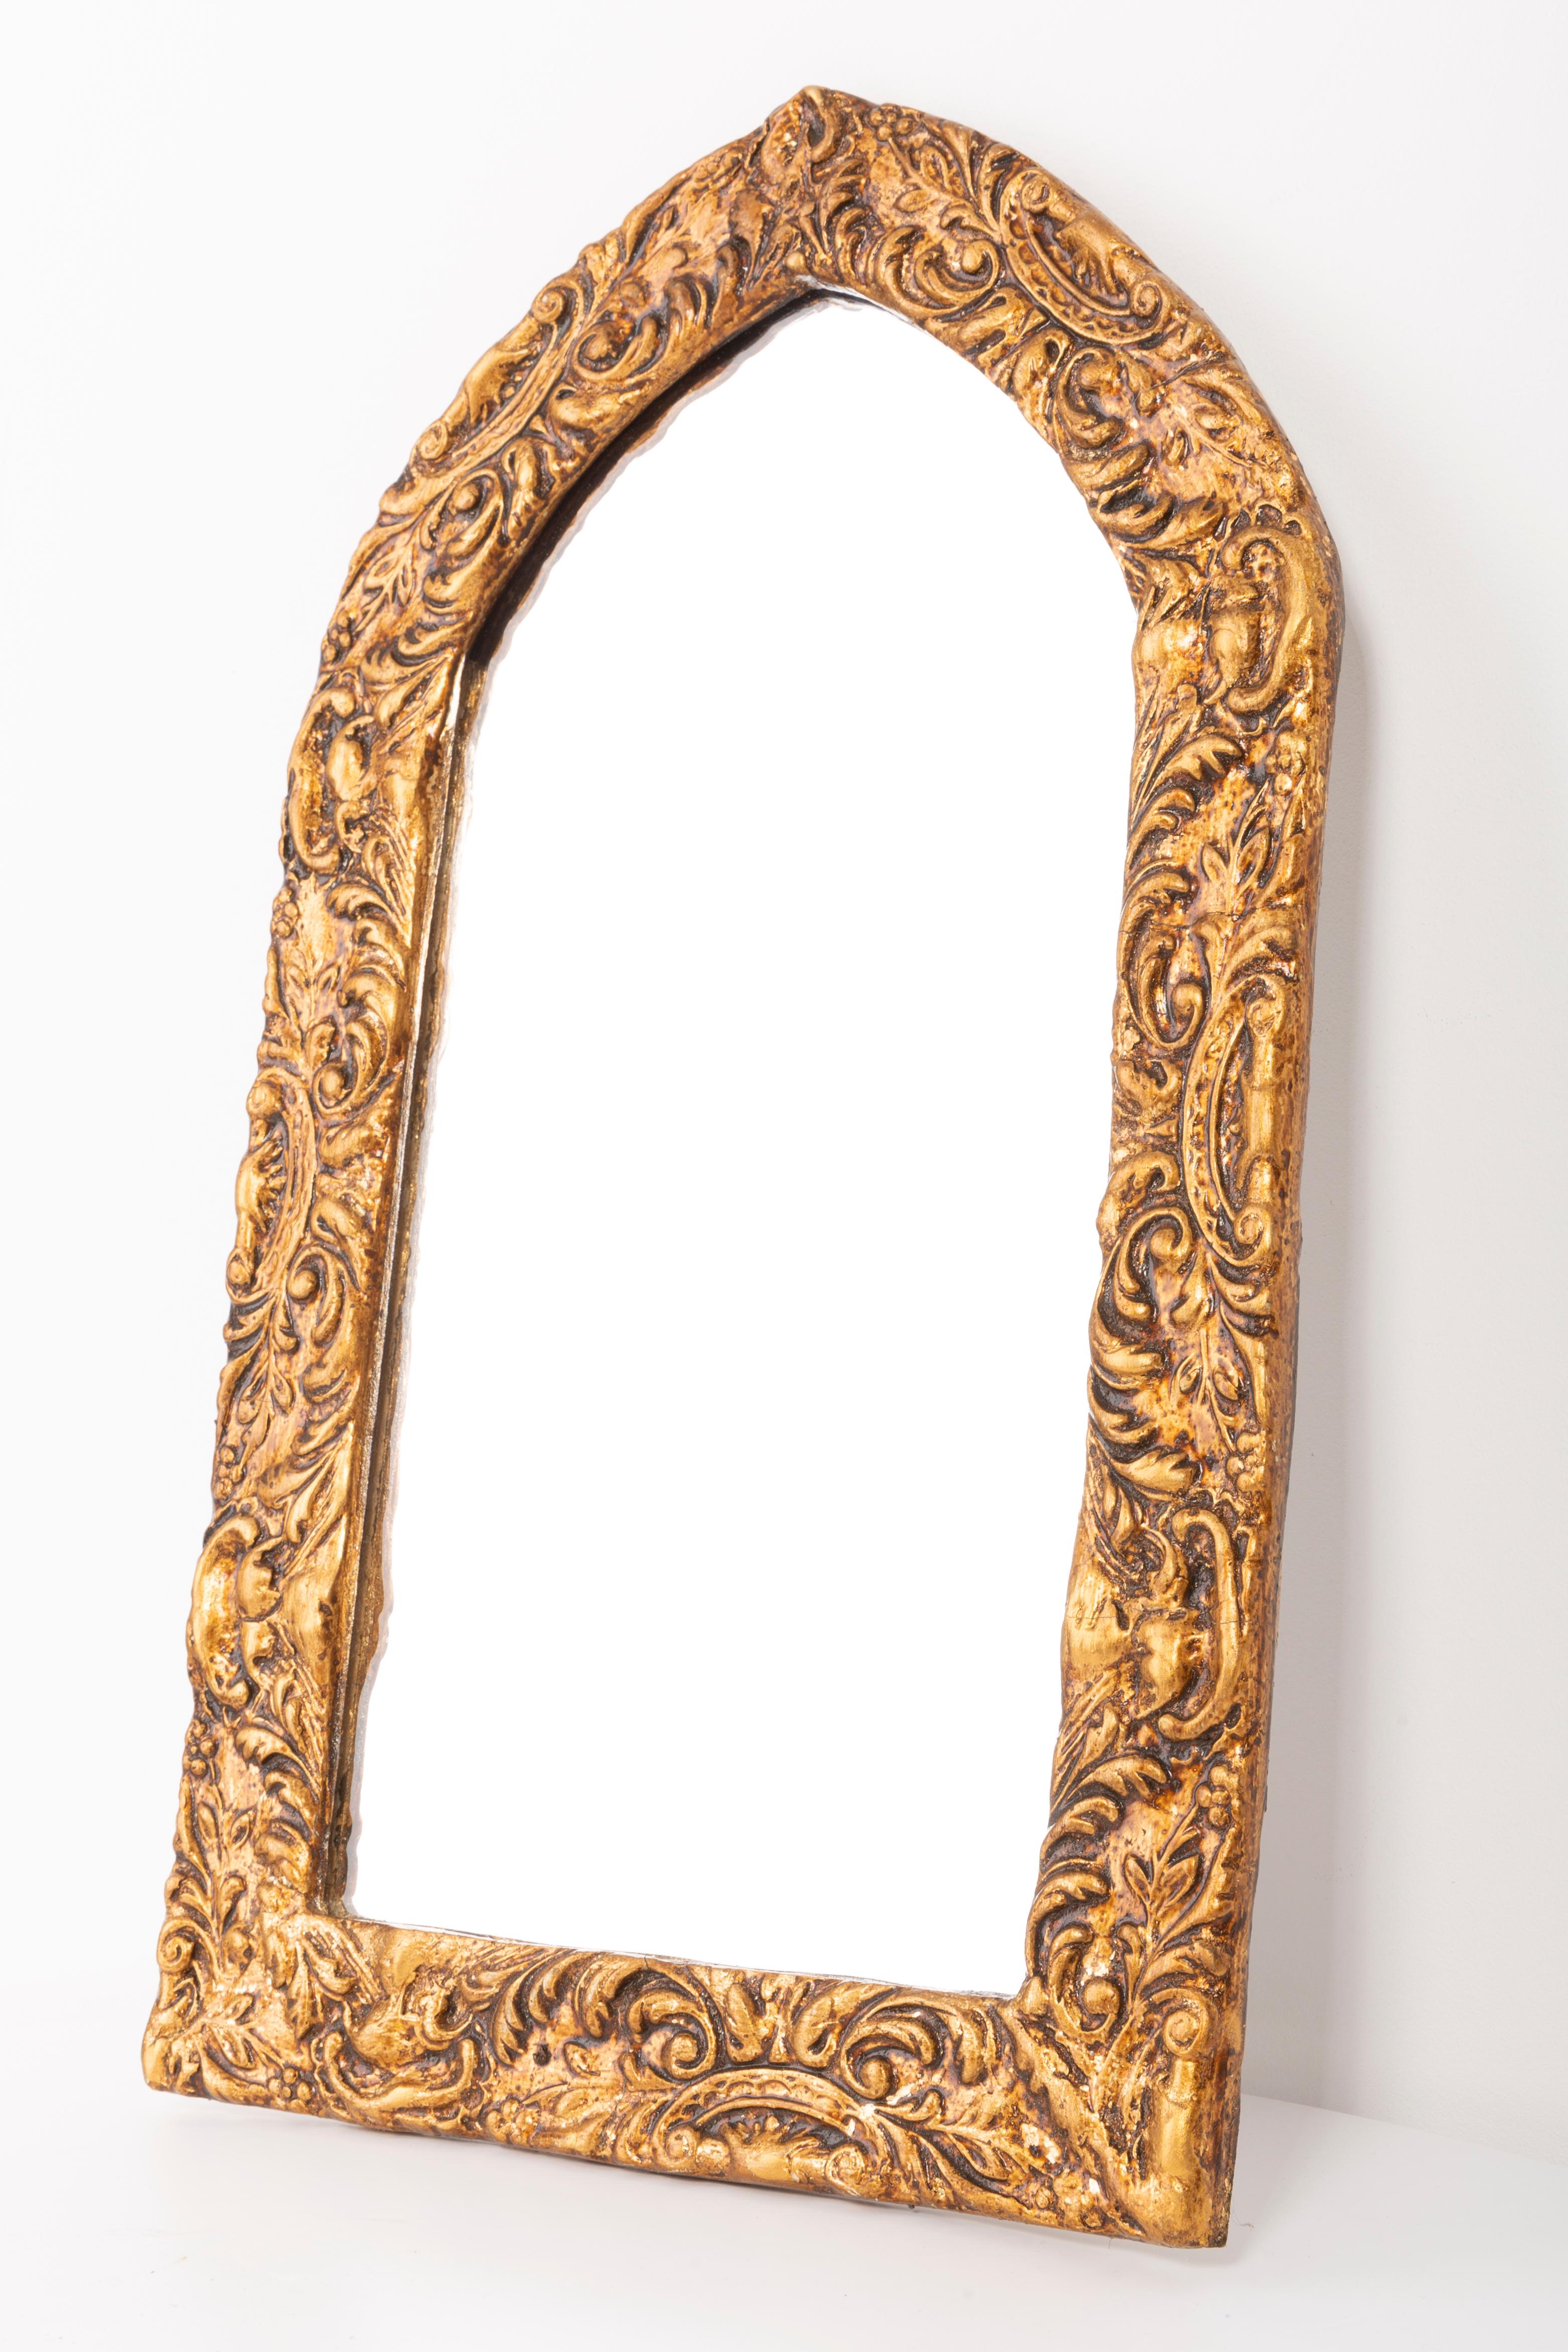 A mirror in a golden decorative frame with flowers from Italy. The frame is made of wood. Mirror is in very good vintage condition, no damage or cracks in the frame. Original glass. Beautiful piece for every interior! Only one unique piece.